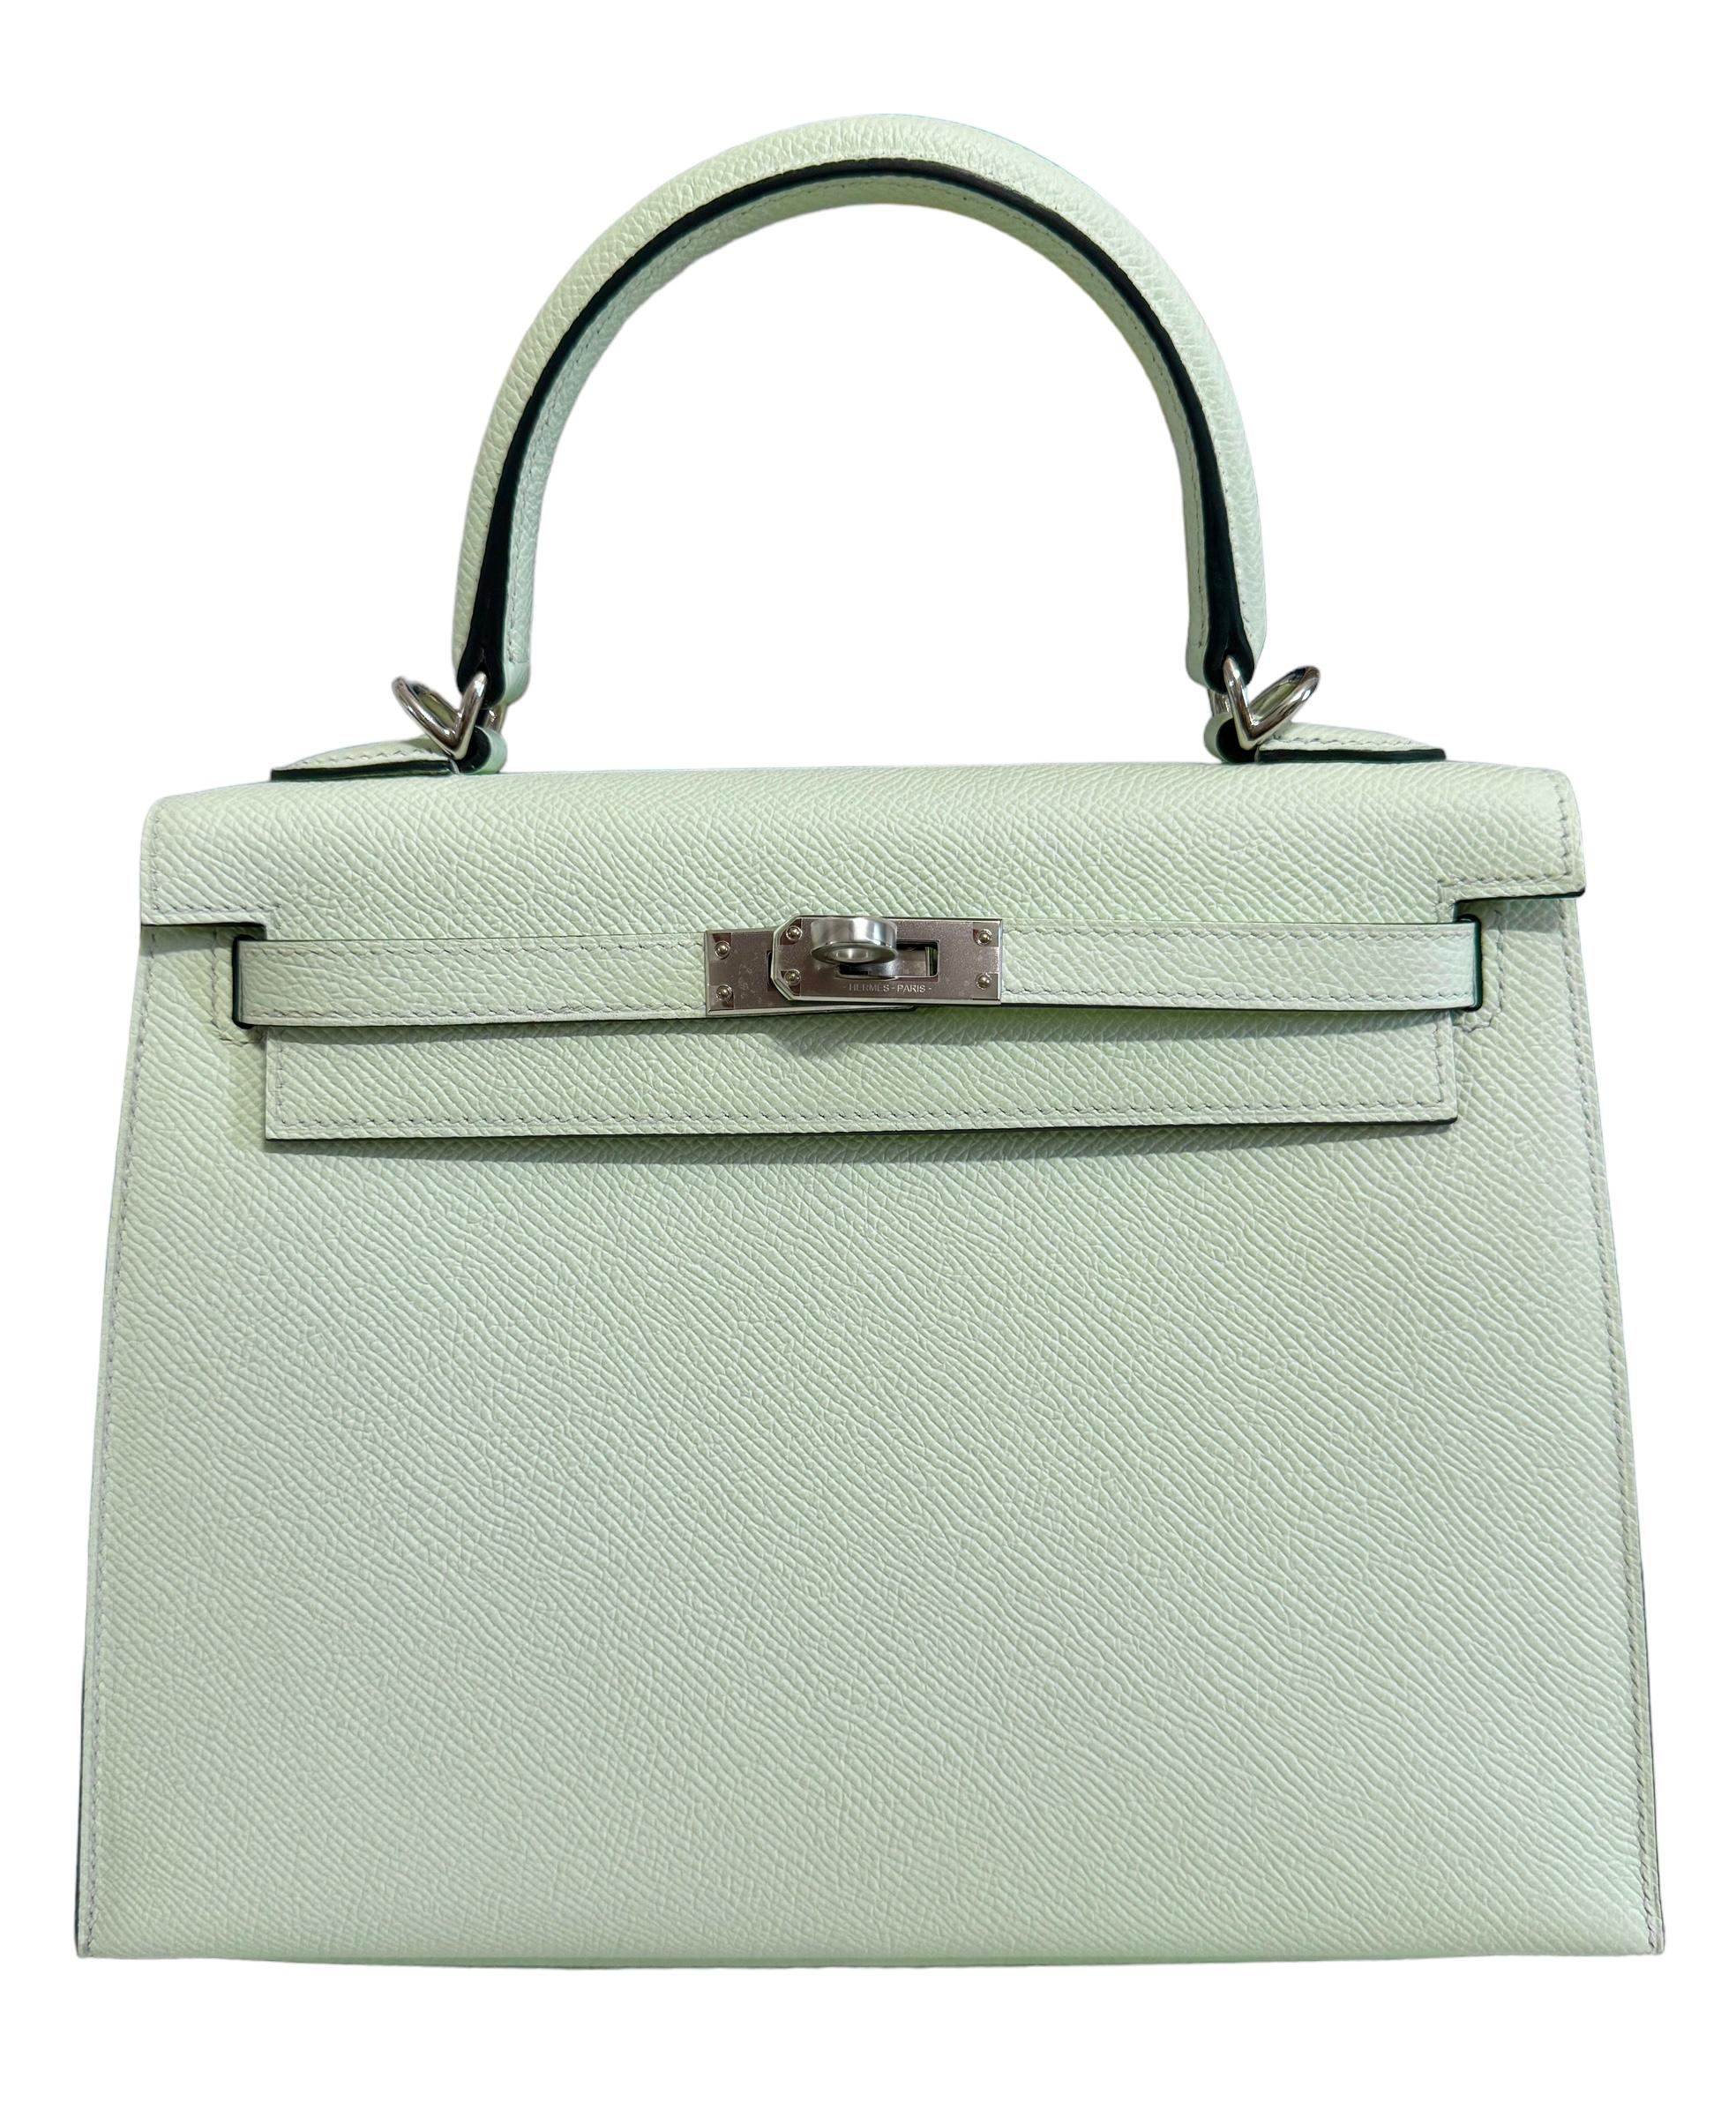 As New VERY RARE Most Coveted Hermes Kelly 25 Sellier Vert Fizz Epsom Leather , Complimented by Palladium Hardware. AS NEW U STAMP 2022. Includes all Accessories and Box.

Shop with confidence from Lux Addicts. Authenticity Guaranteed!

Lux Addicts